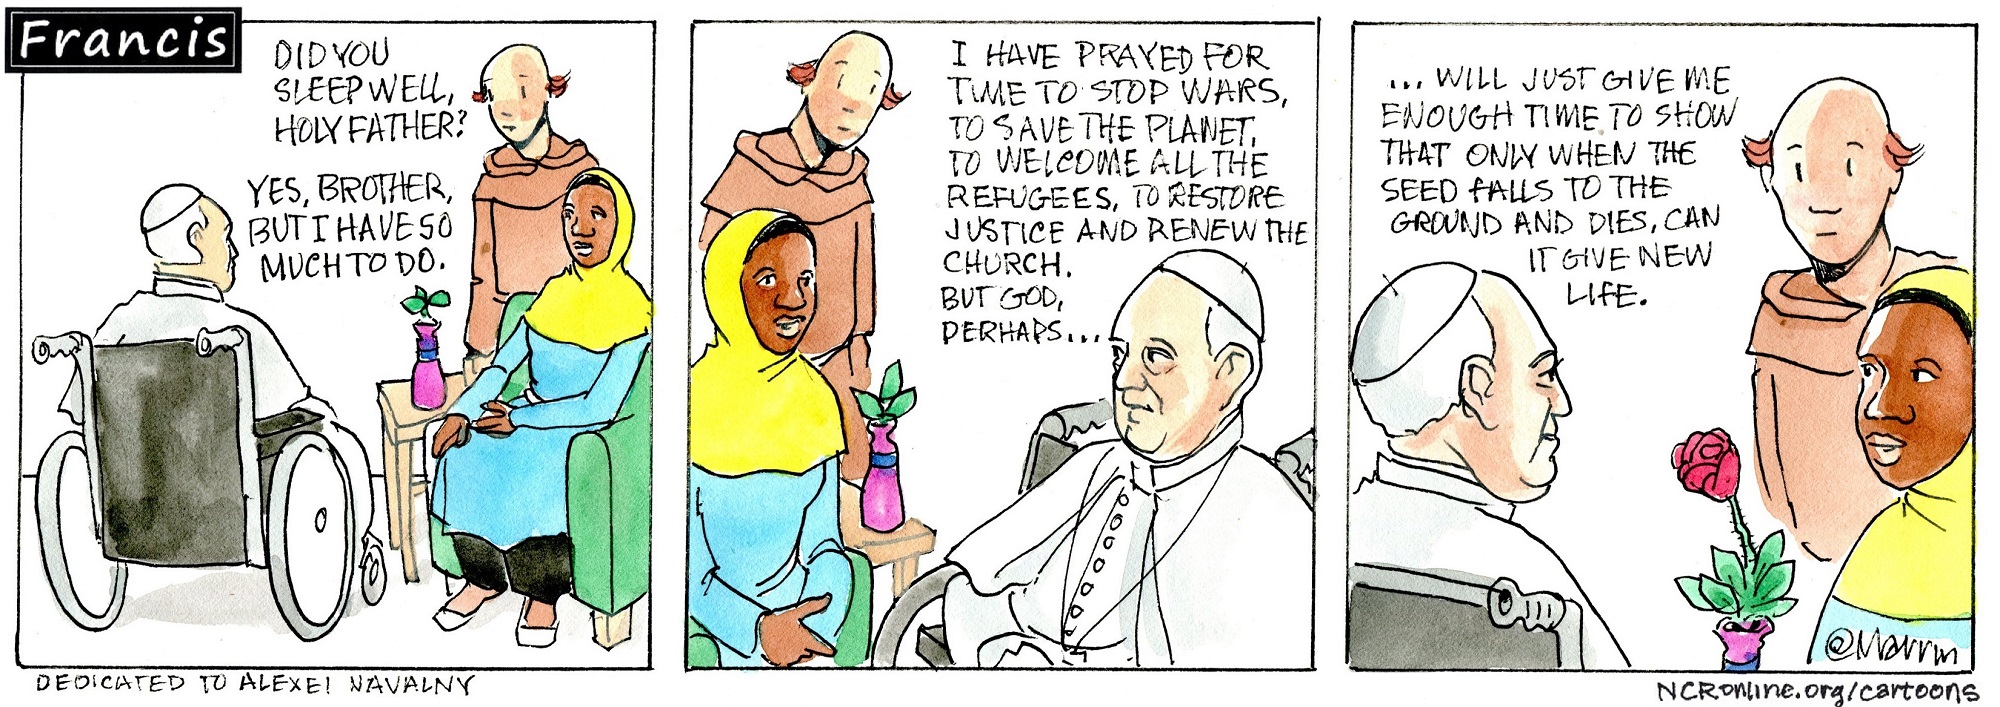 Pope Francis reflects on the wisdom of John 12:24.